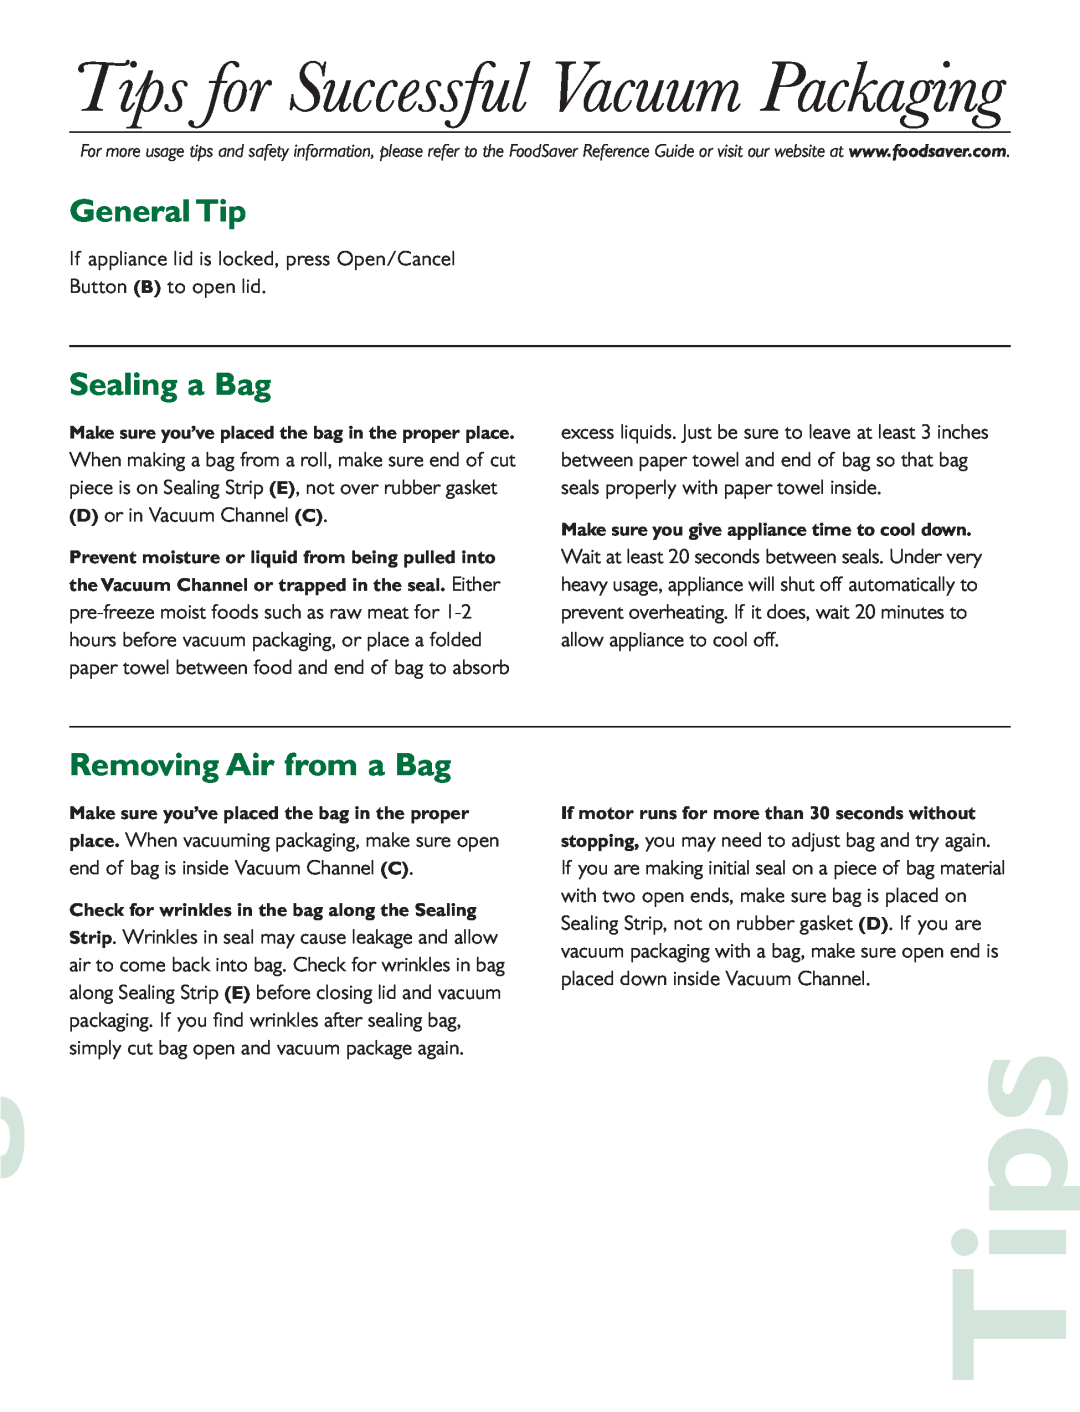 FoodSaver V240 quick start Tips for Successful Vacuum Packaging, General Tip, Sealing a Bag, Removing Air from a Bag 